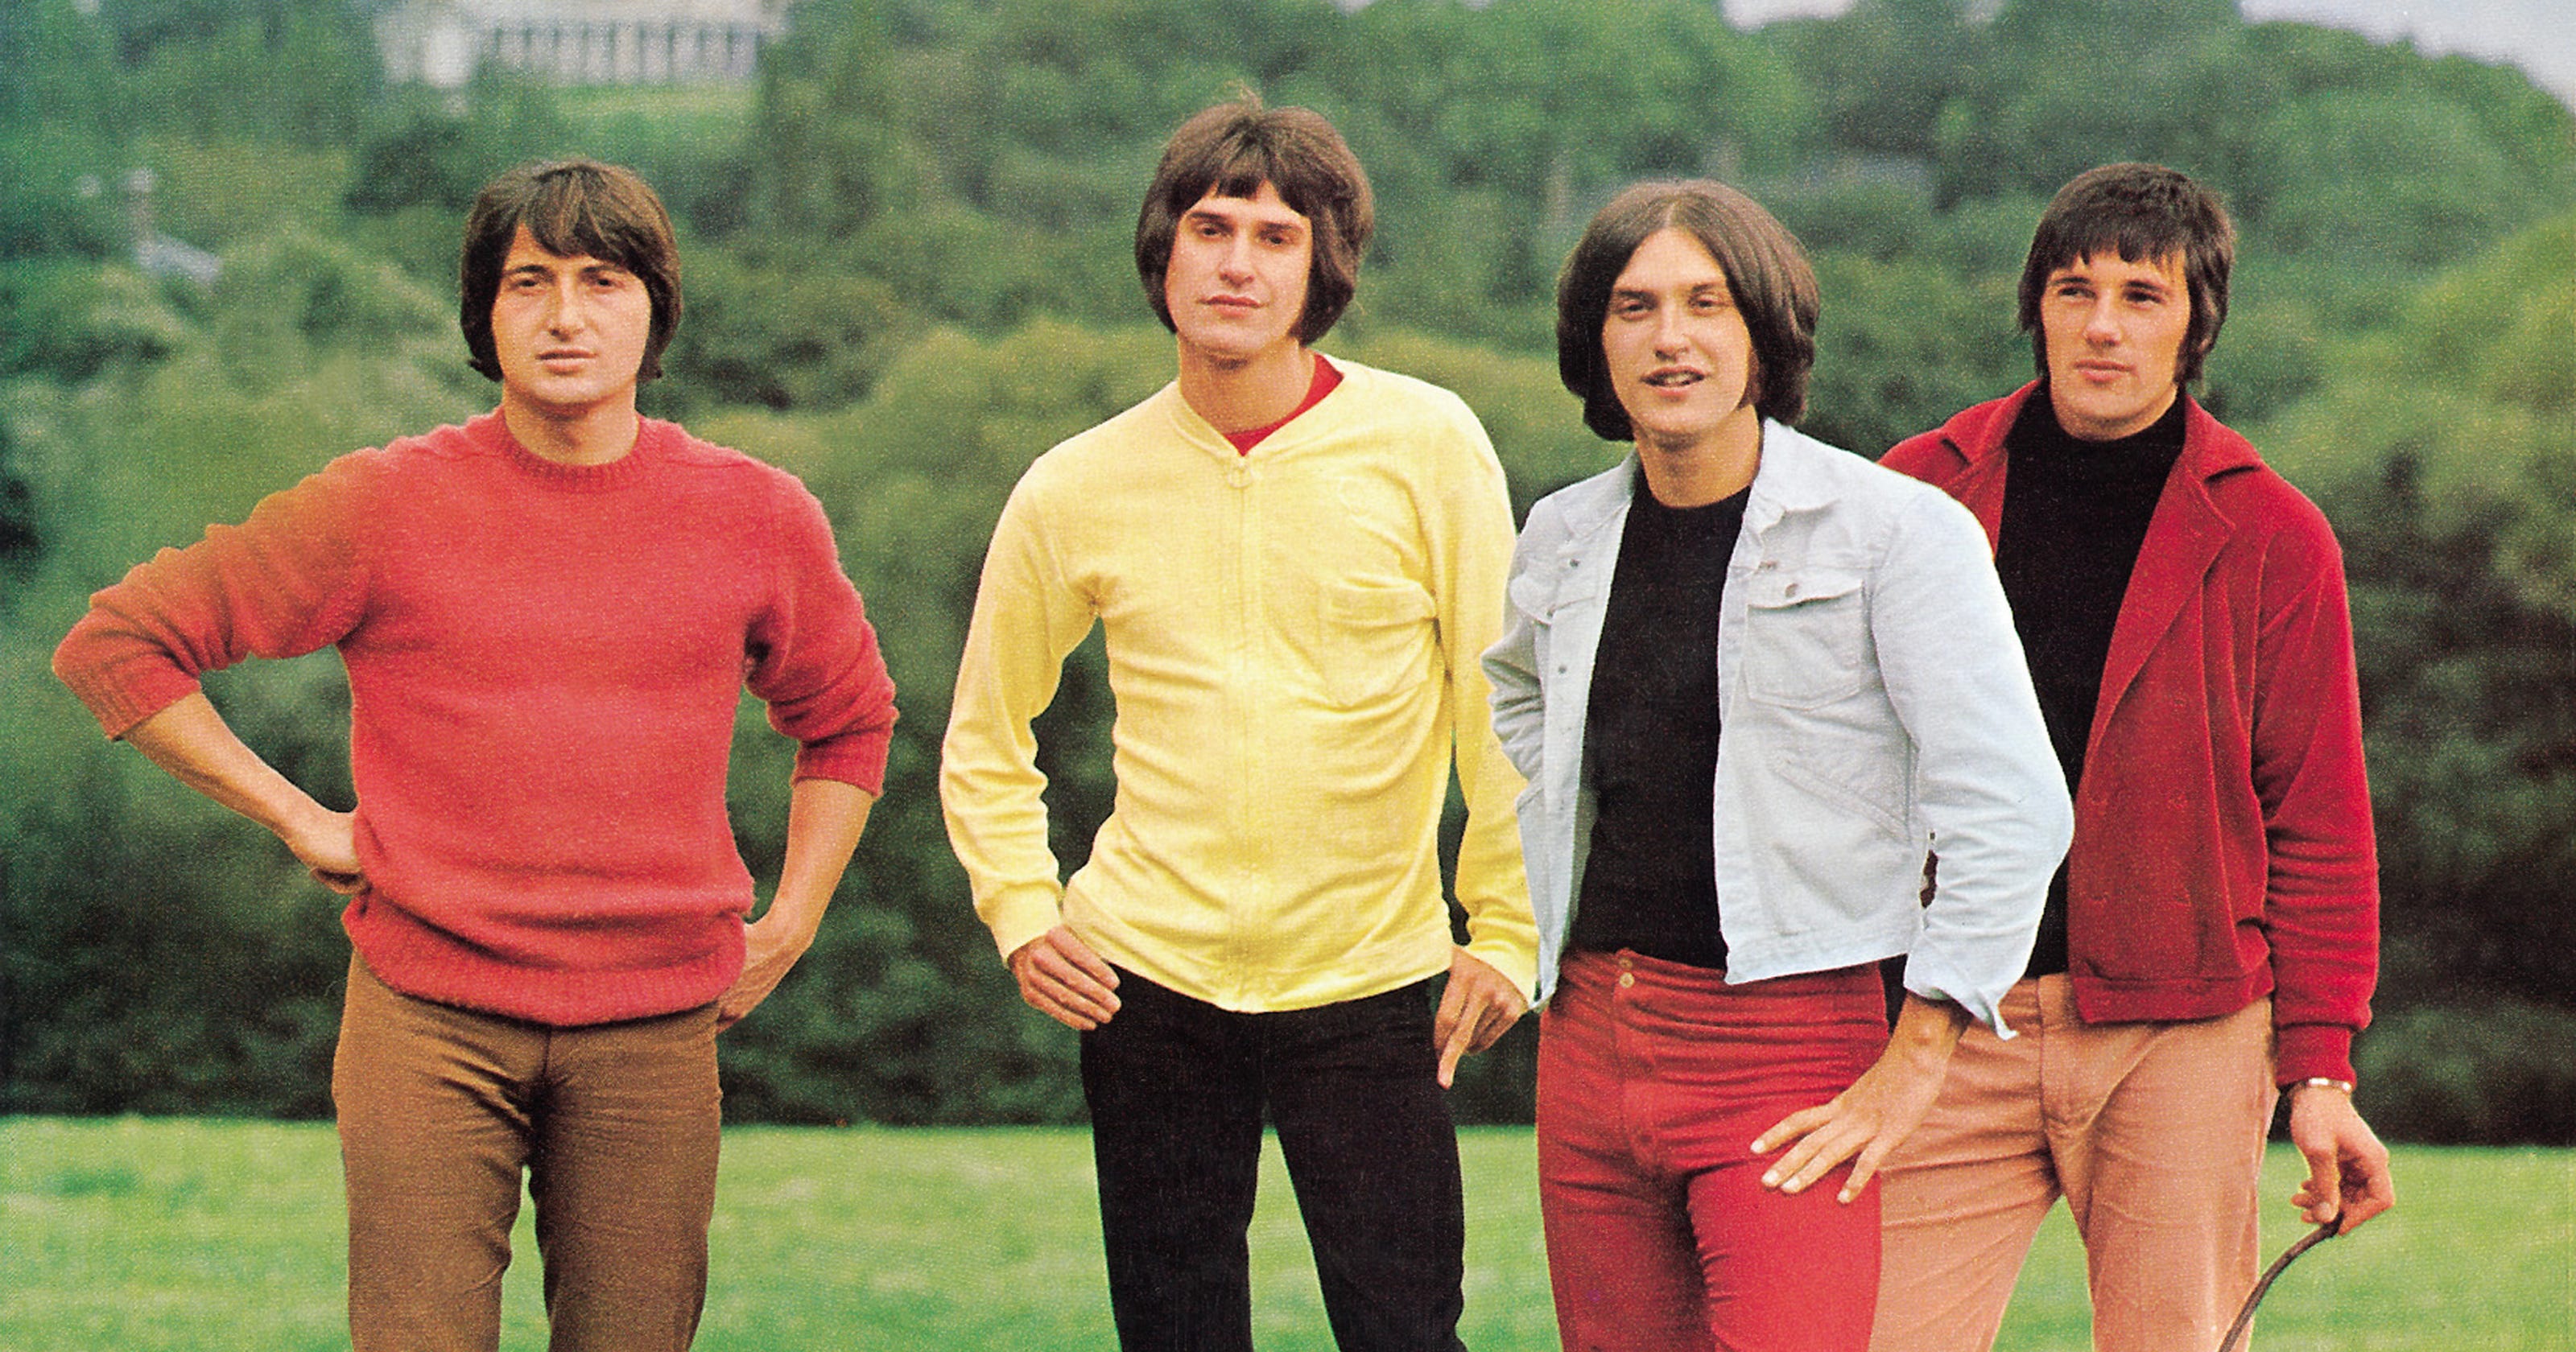 The Kinks' Dave Davies reflects on classic 'Village Green' album at 50